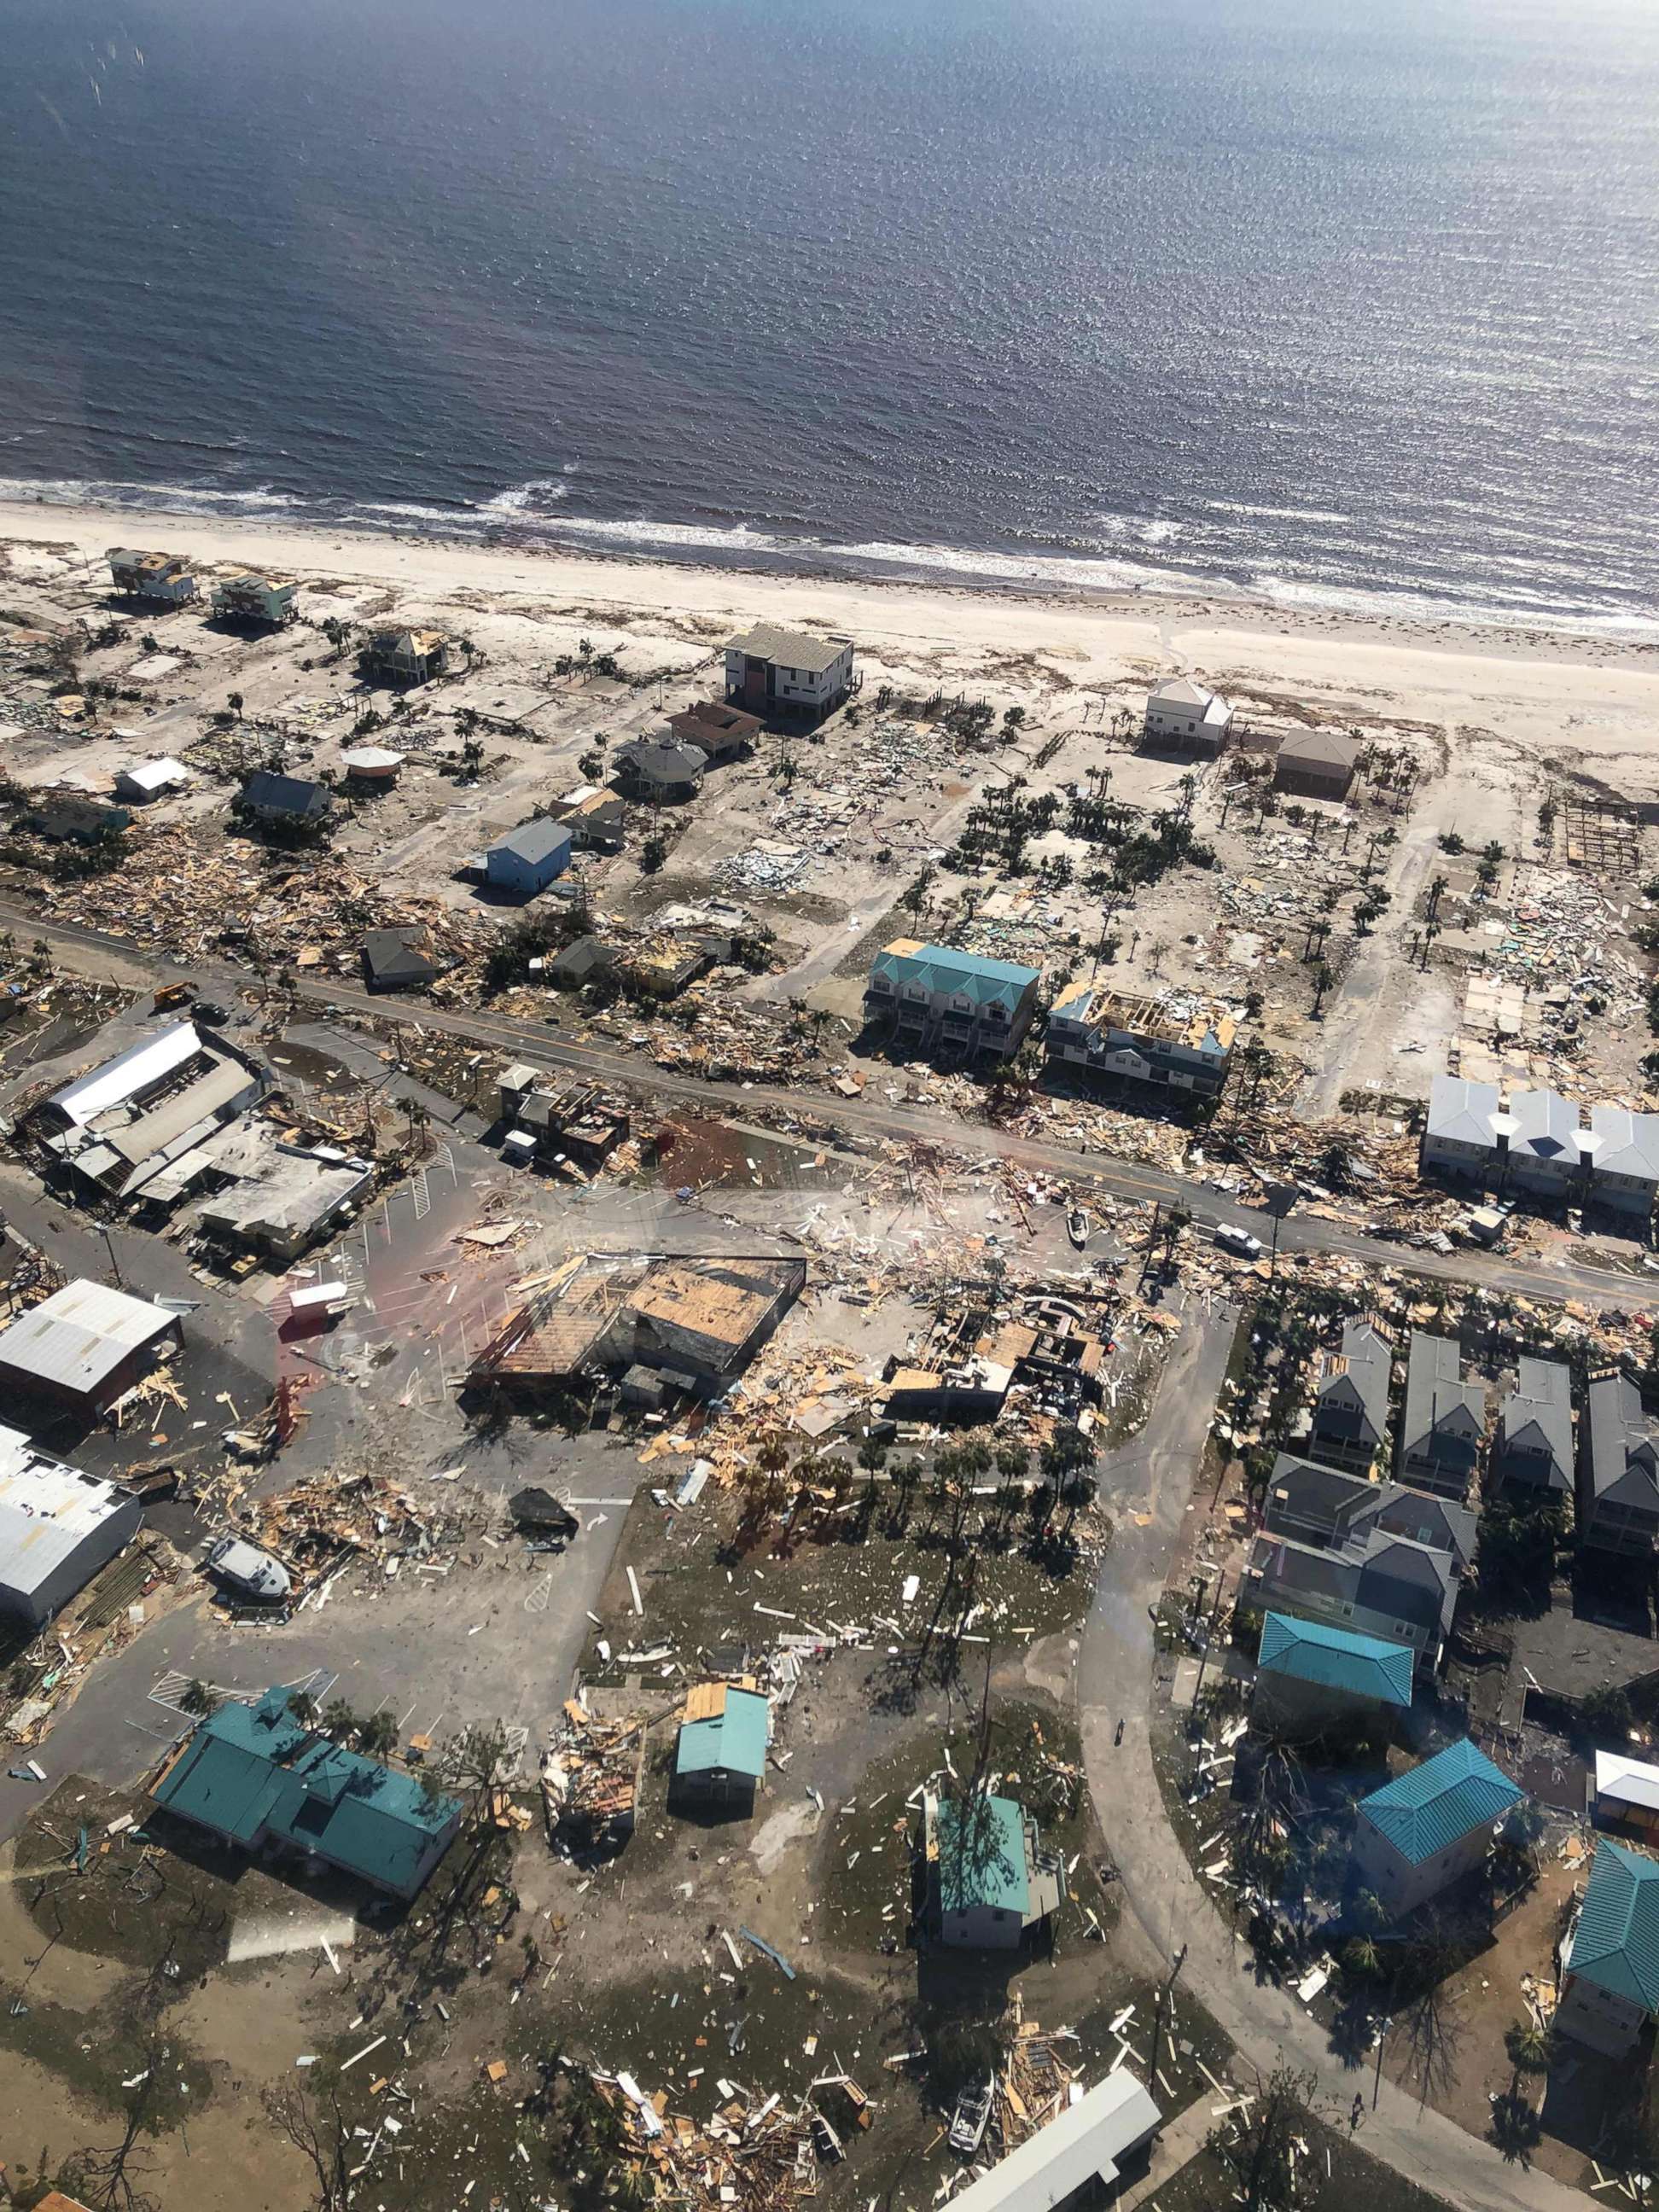 PHOTO: A U.S. Customs and Border Protection helicopter surveys the damage wrought by Hurricane Michael over Mexico Beach, Fla., on Oct. 11, 2018.